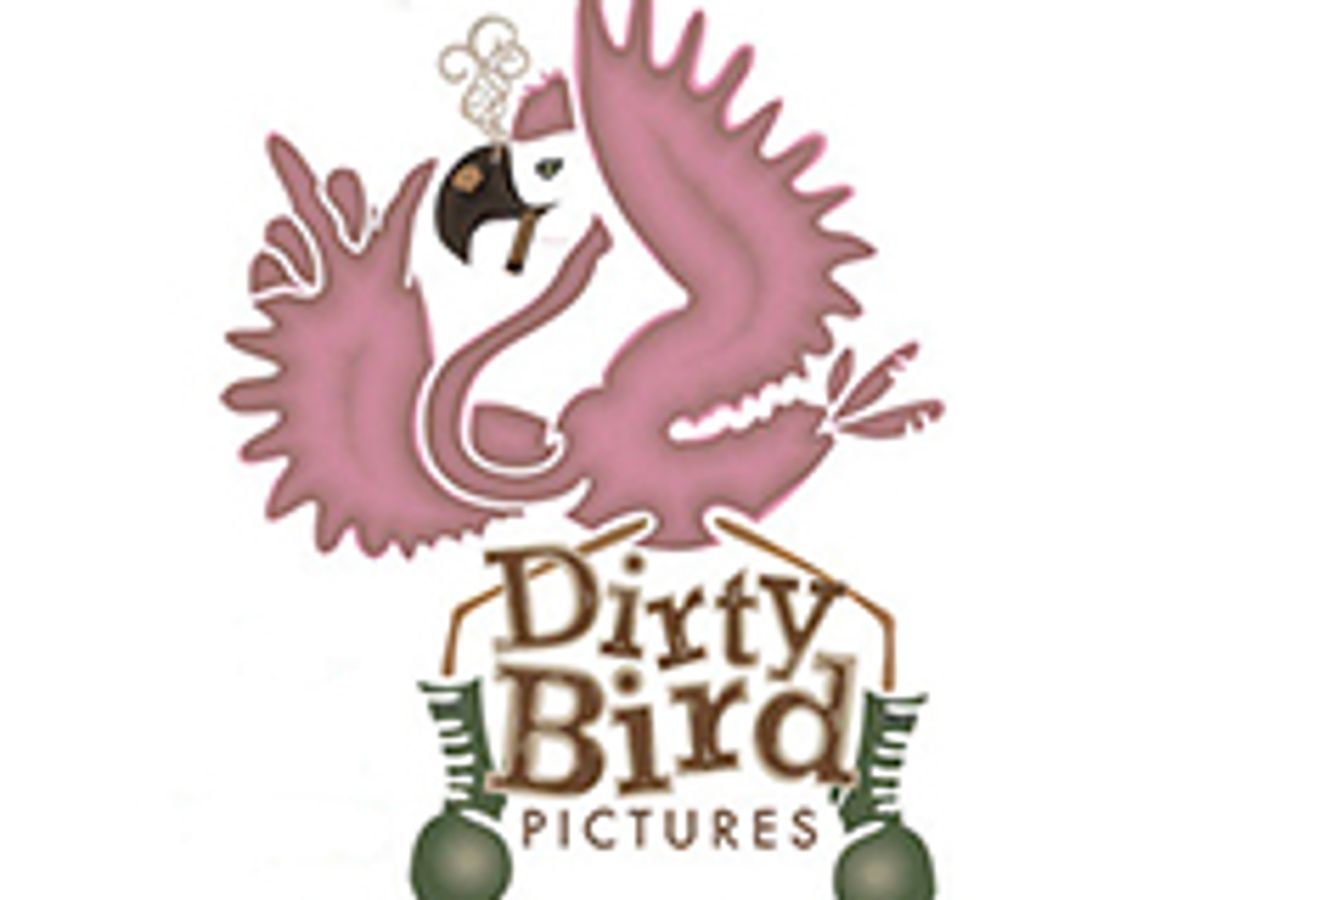 Dirty Bird Pictures